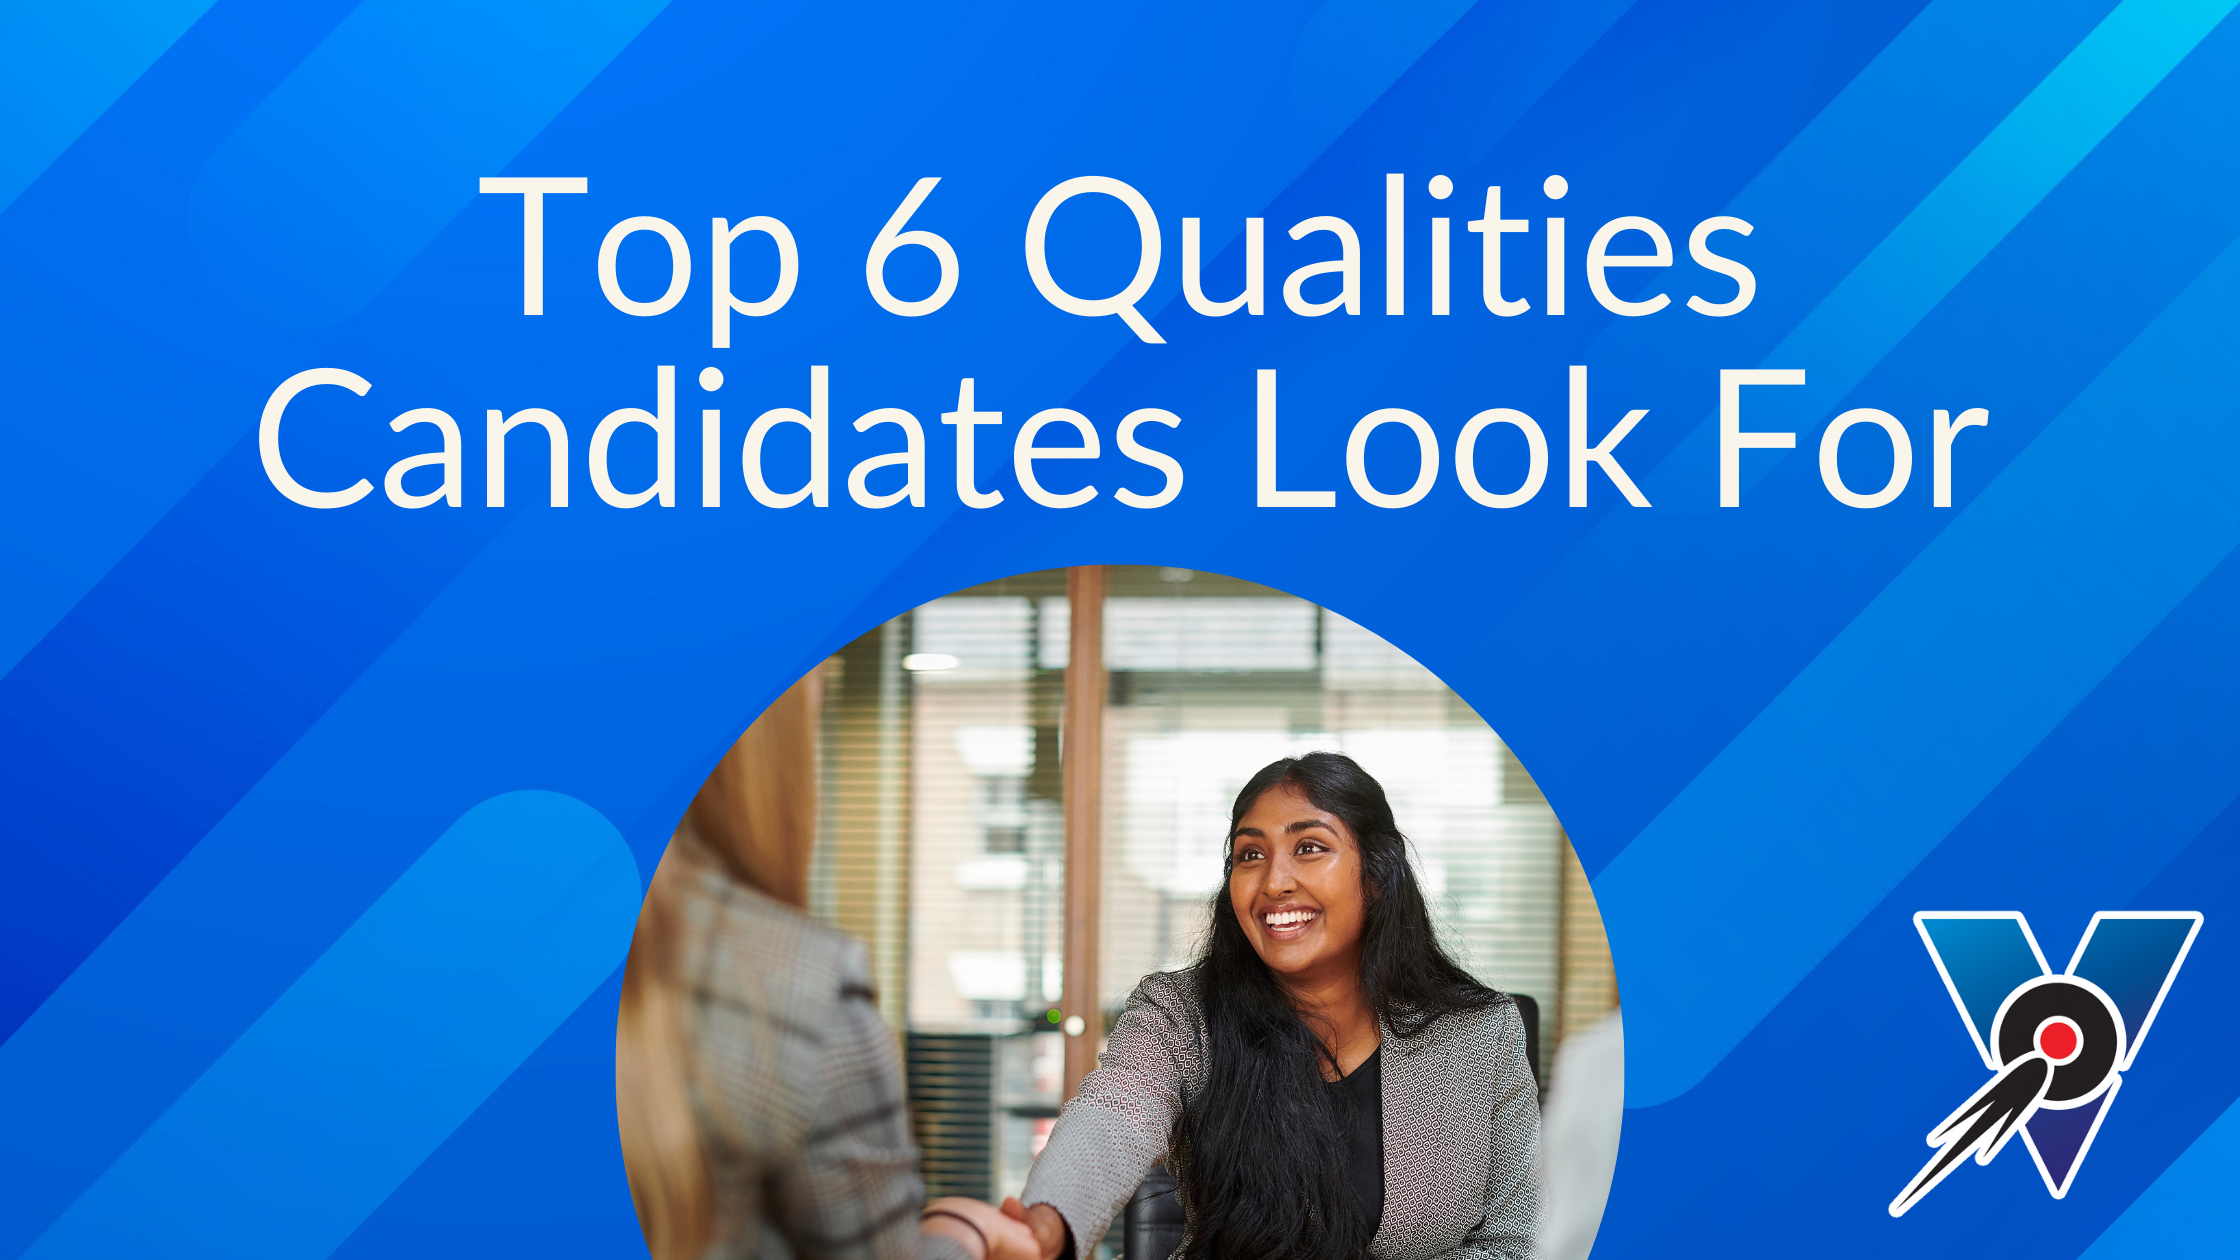 Top 6 Qualities Candidates Look For